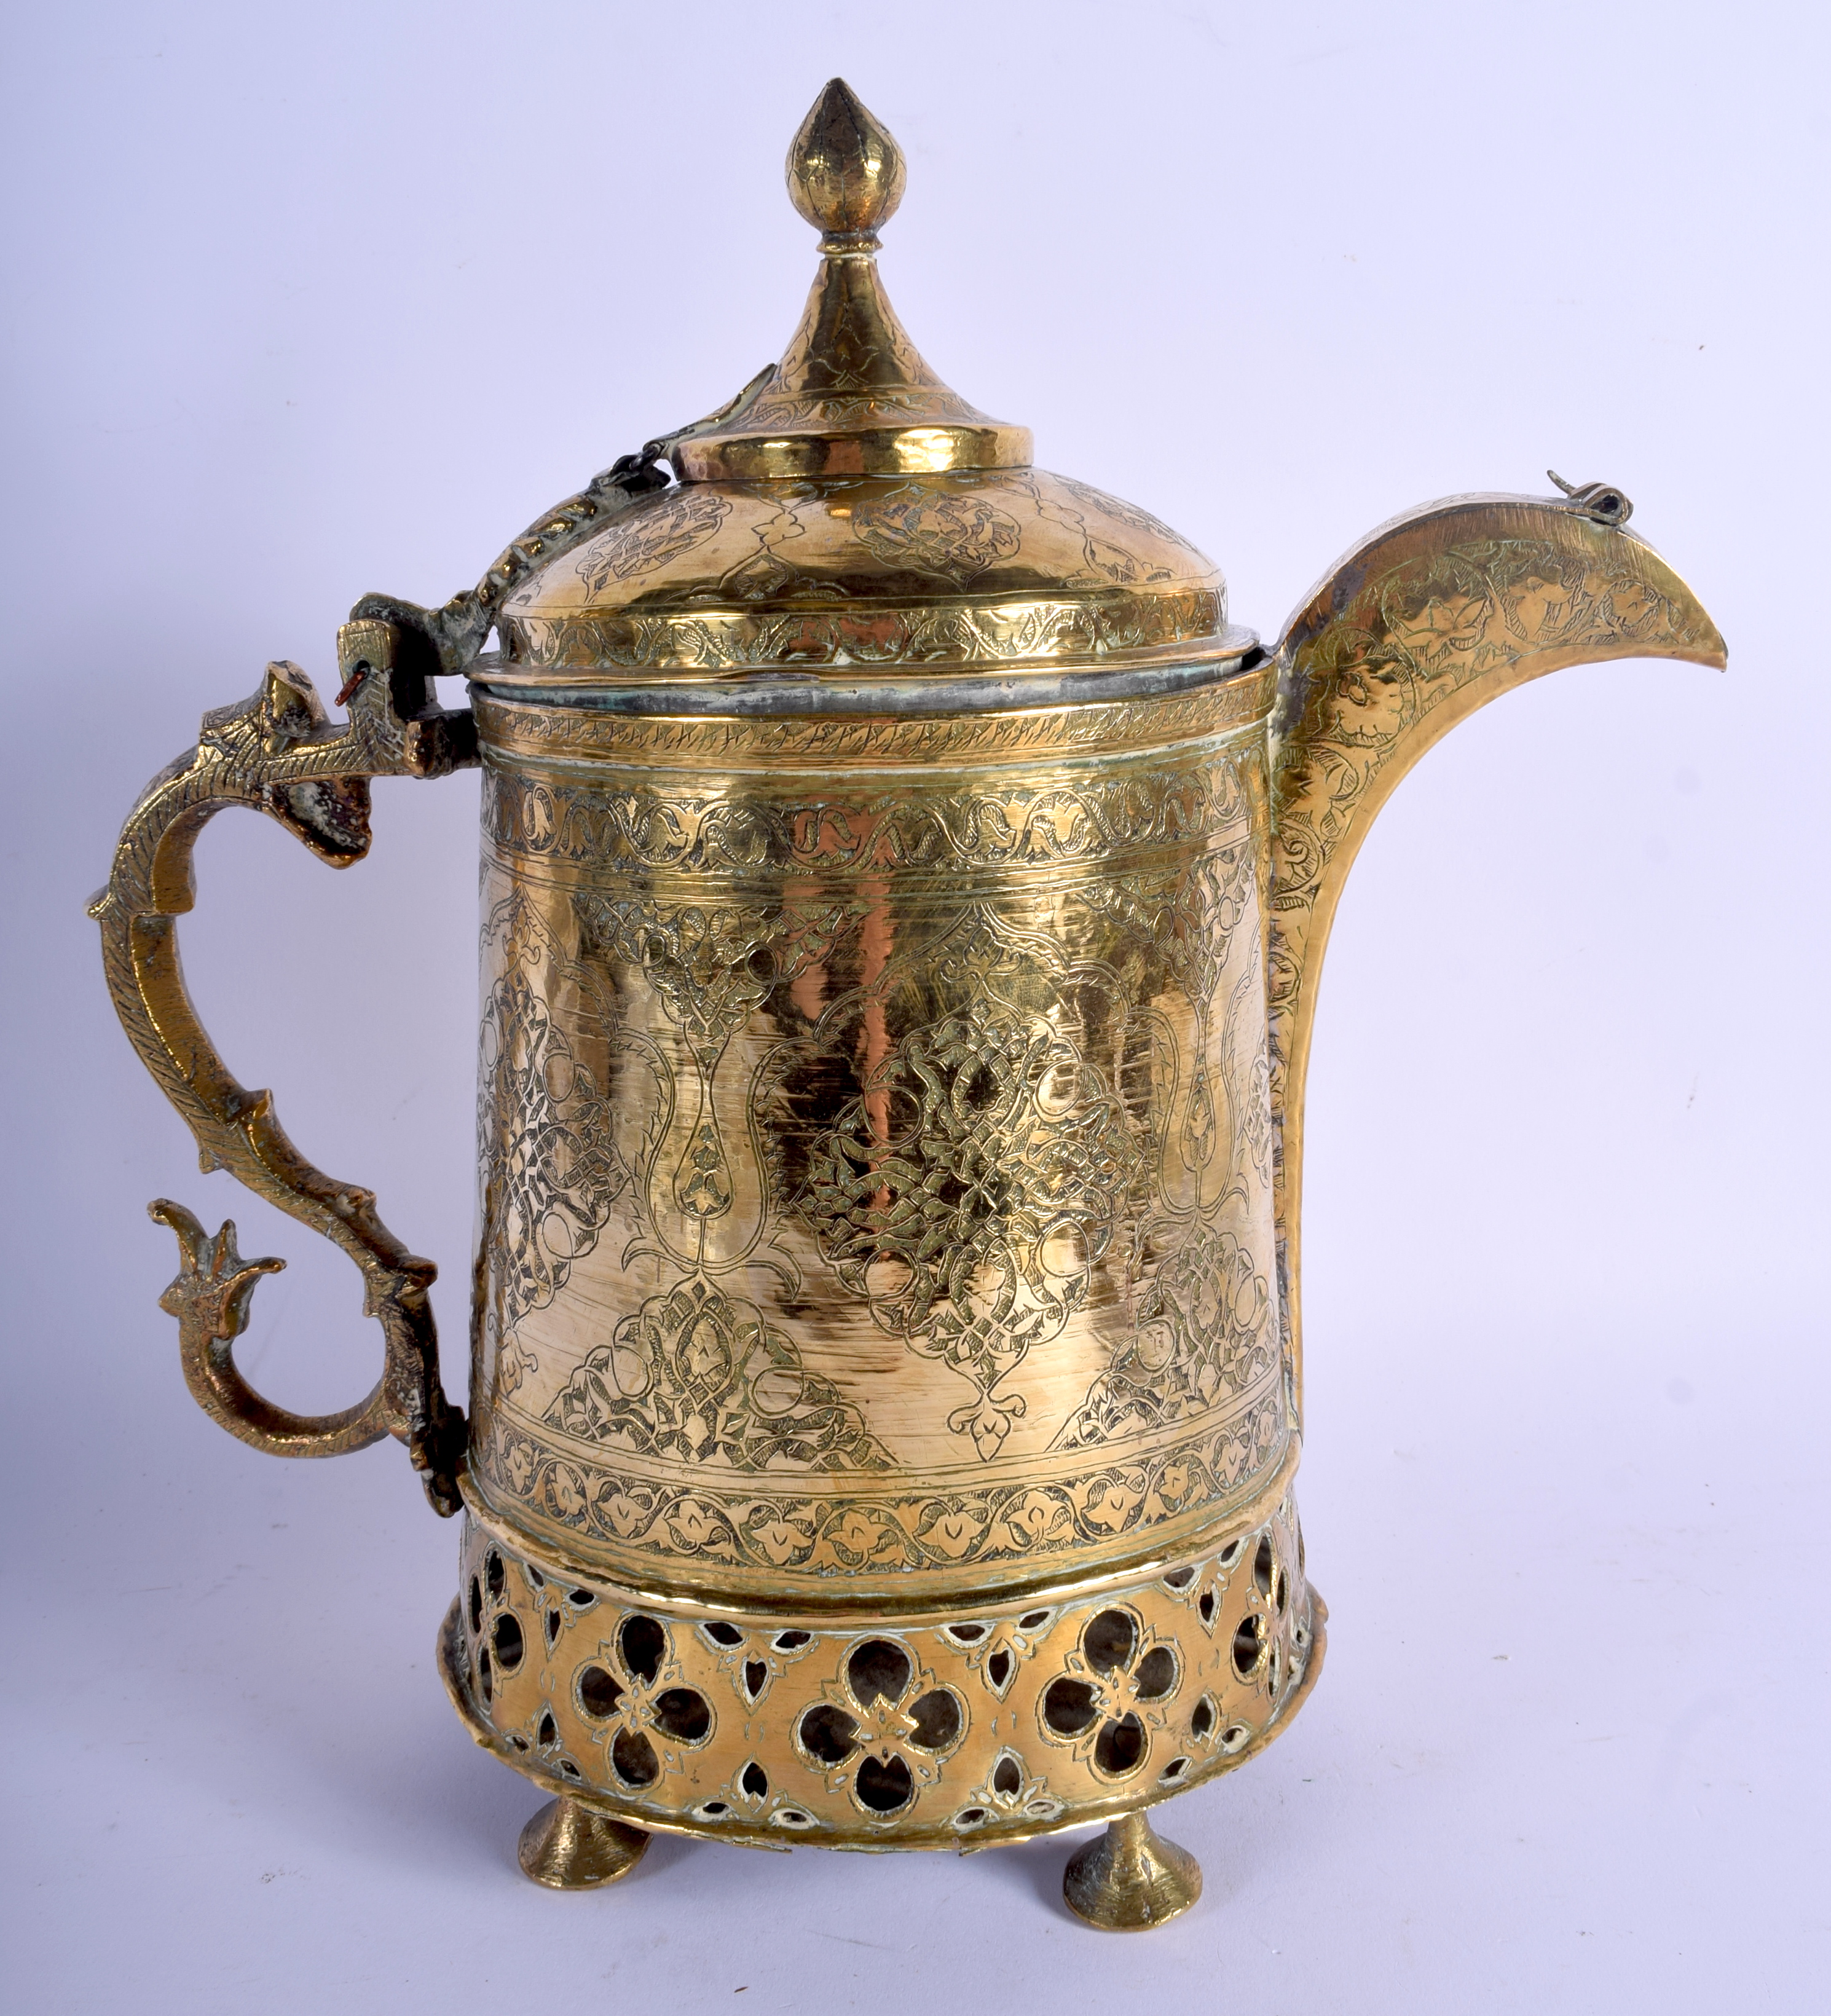 A LARGE 19TH CENTURY MIDDLE EASTERN BRASS KUFIC EWER decorated with foliage and vines. 30 cm x 22 c